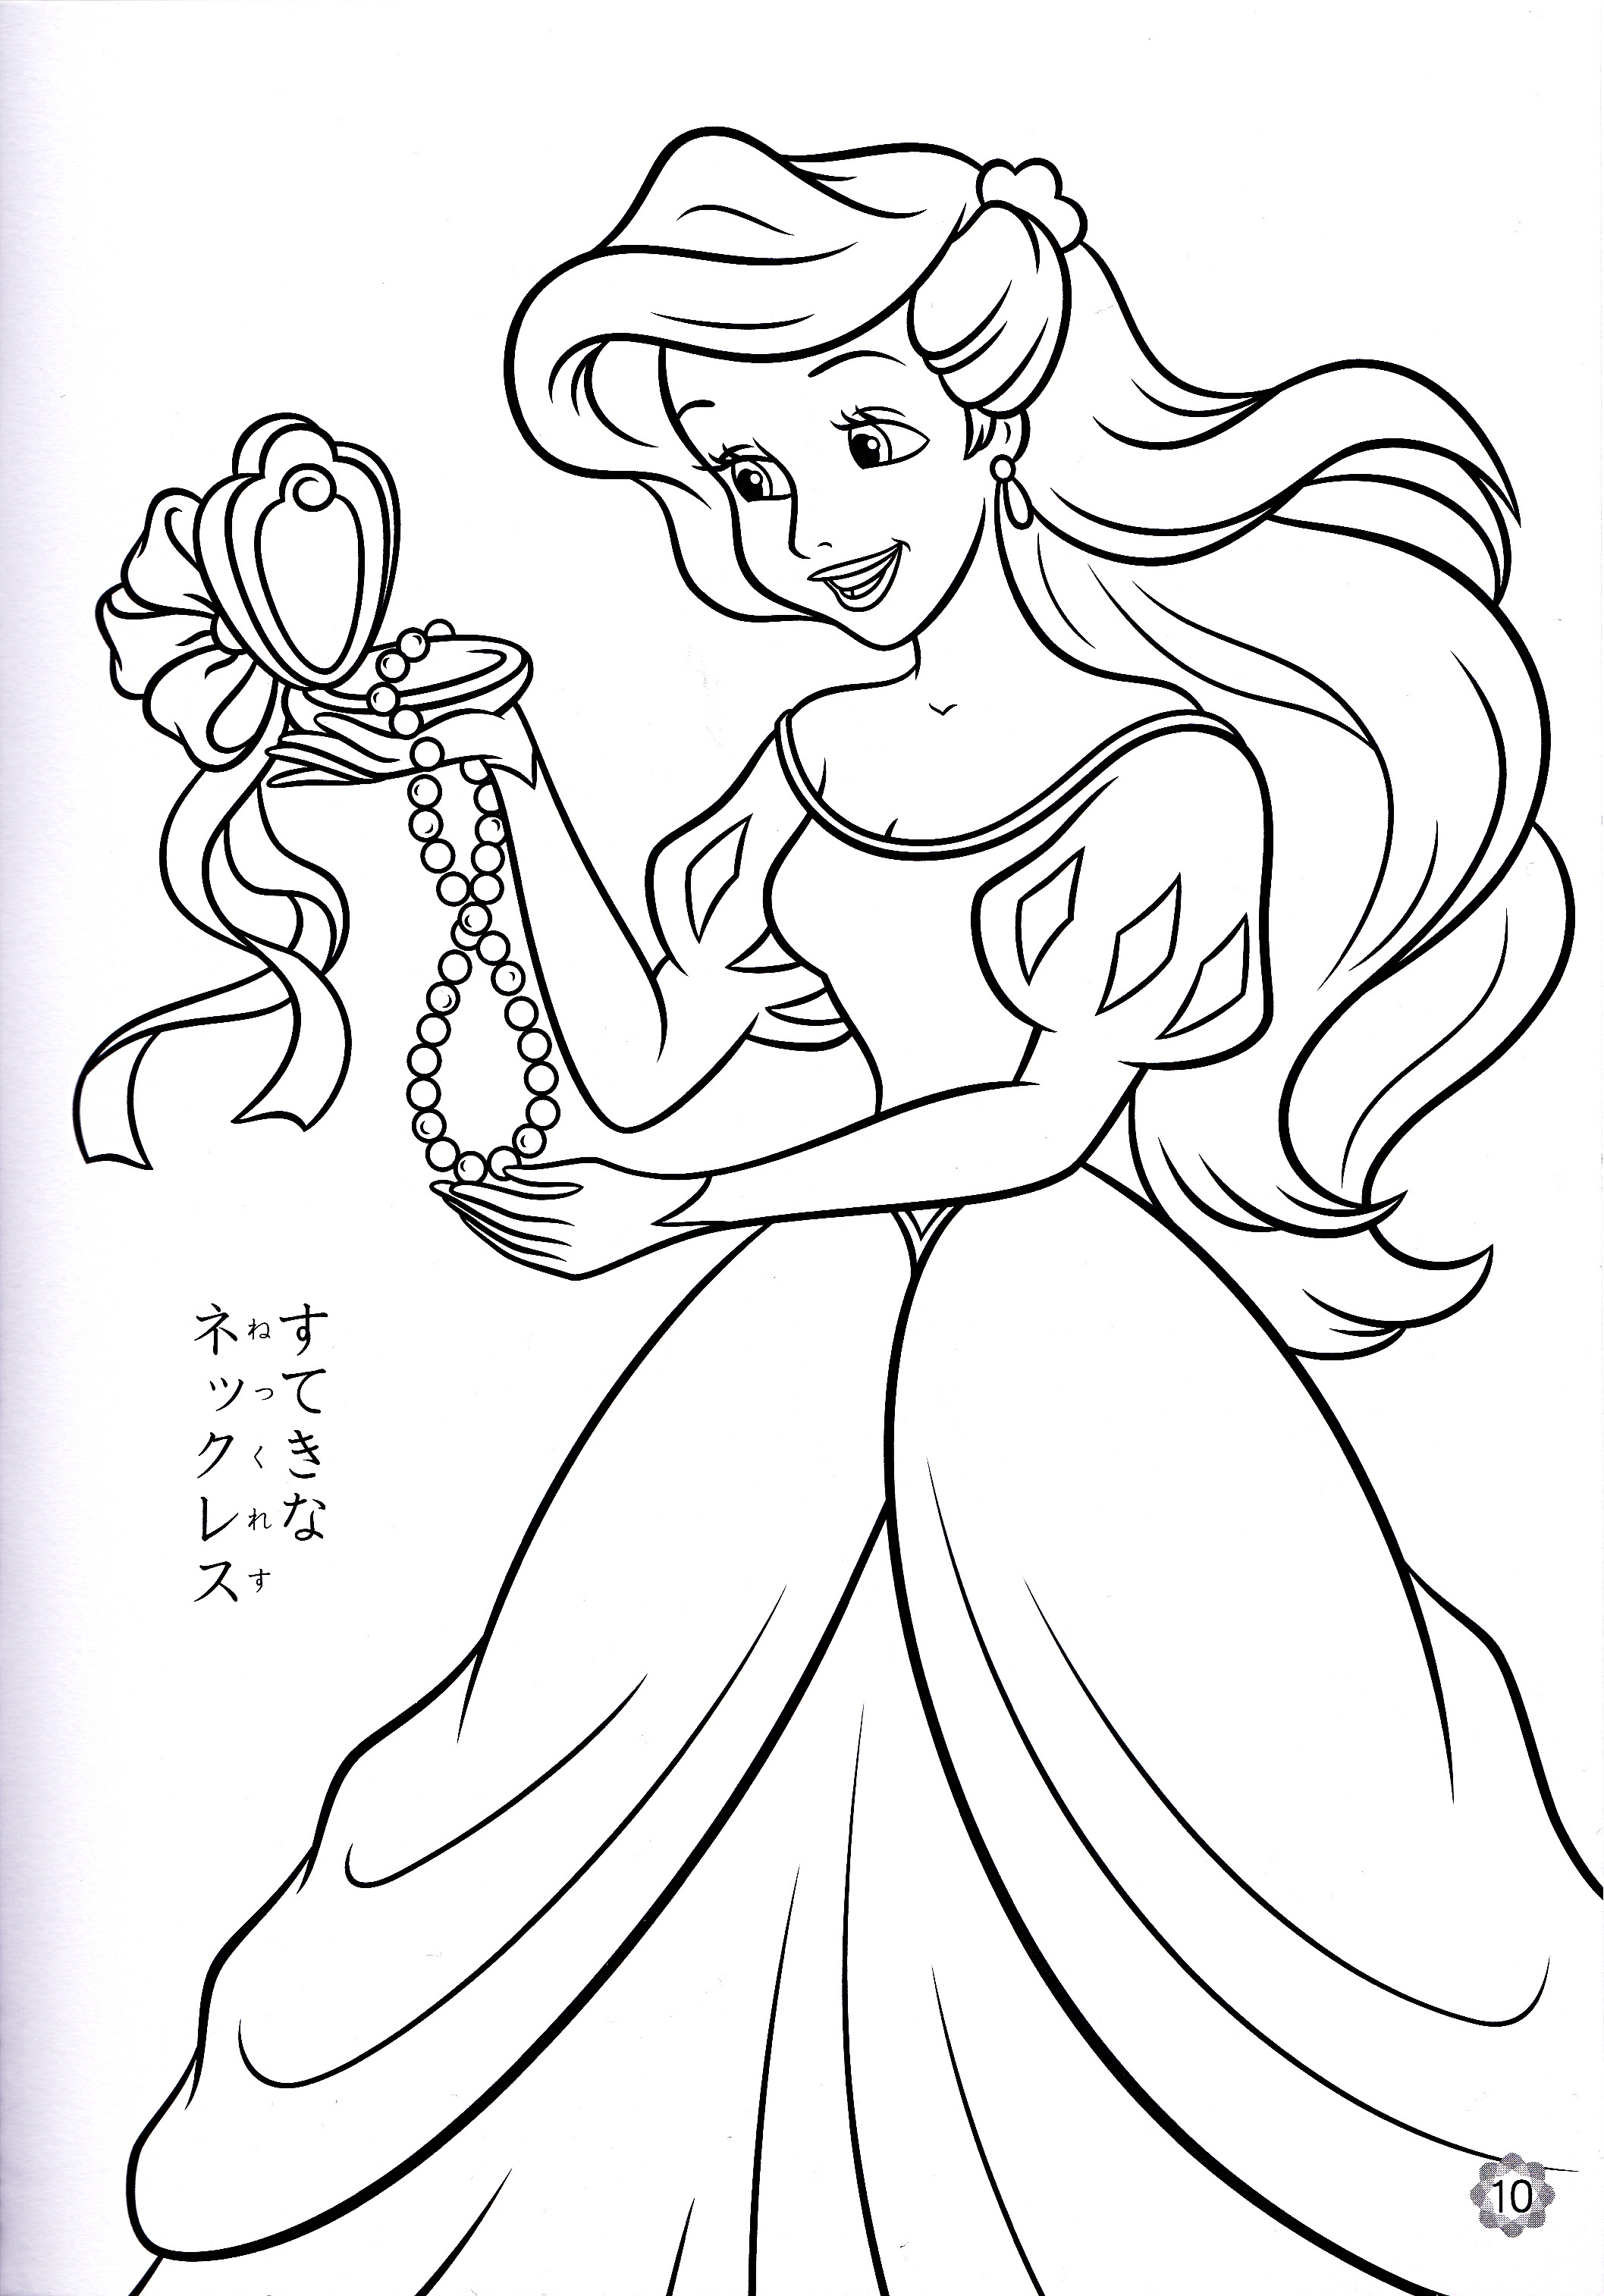 Disney Coloring Book Pages
 Free Printable Disney Princess Coloring Pages For Kids